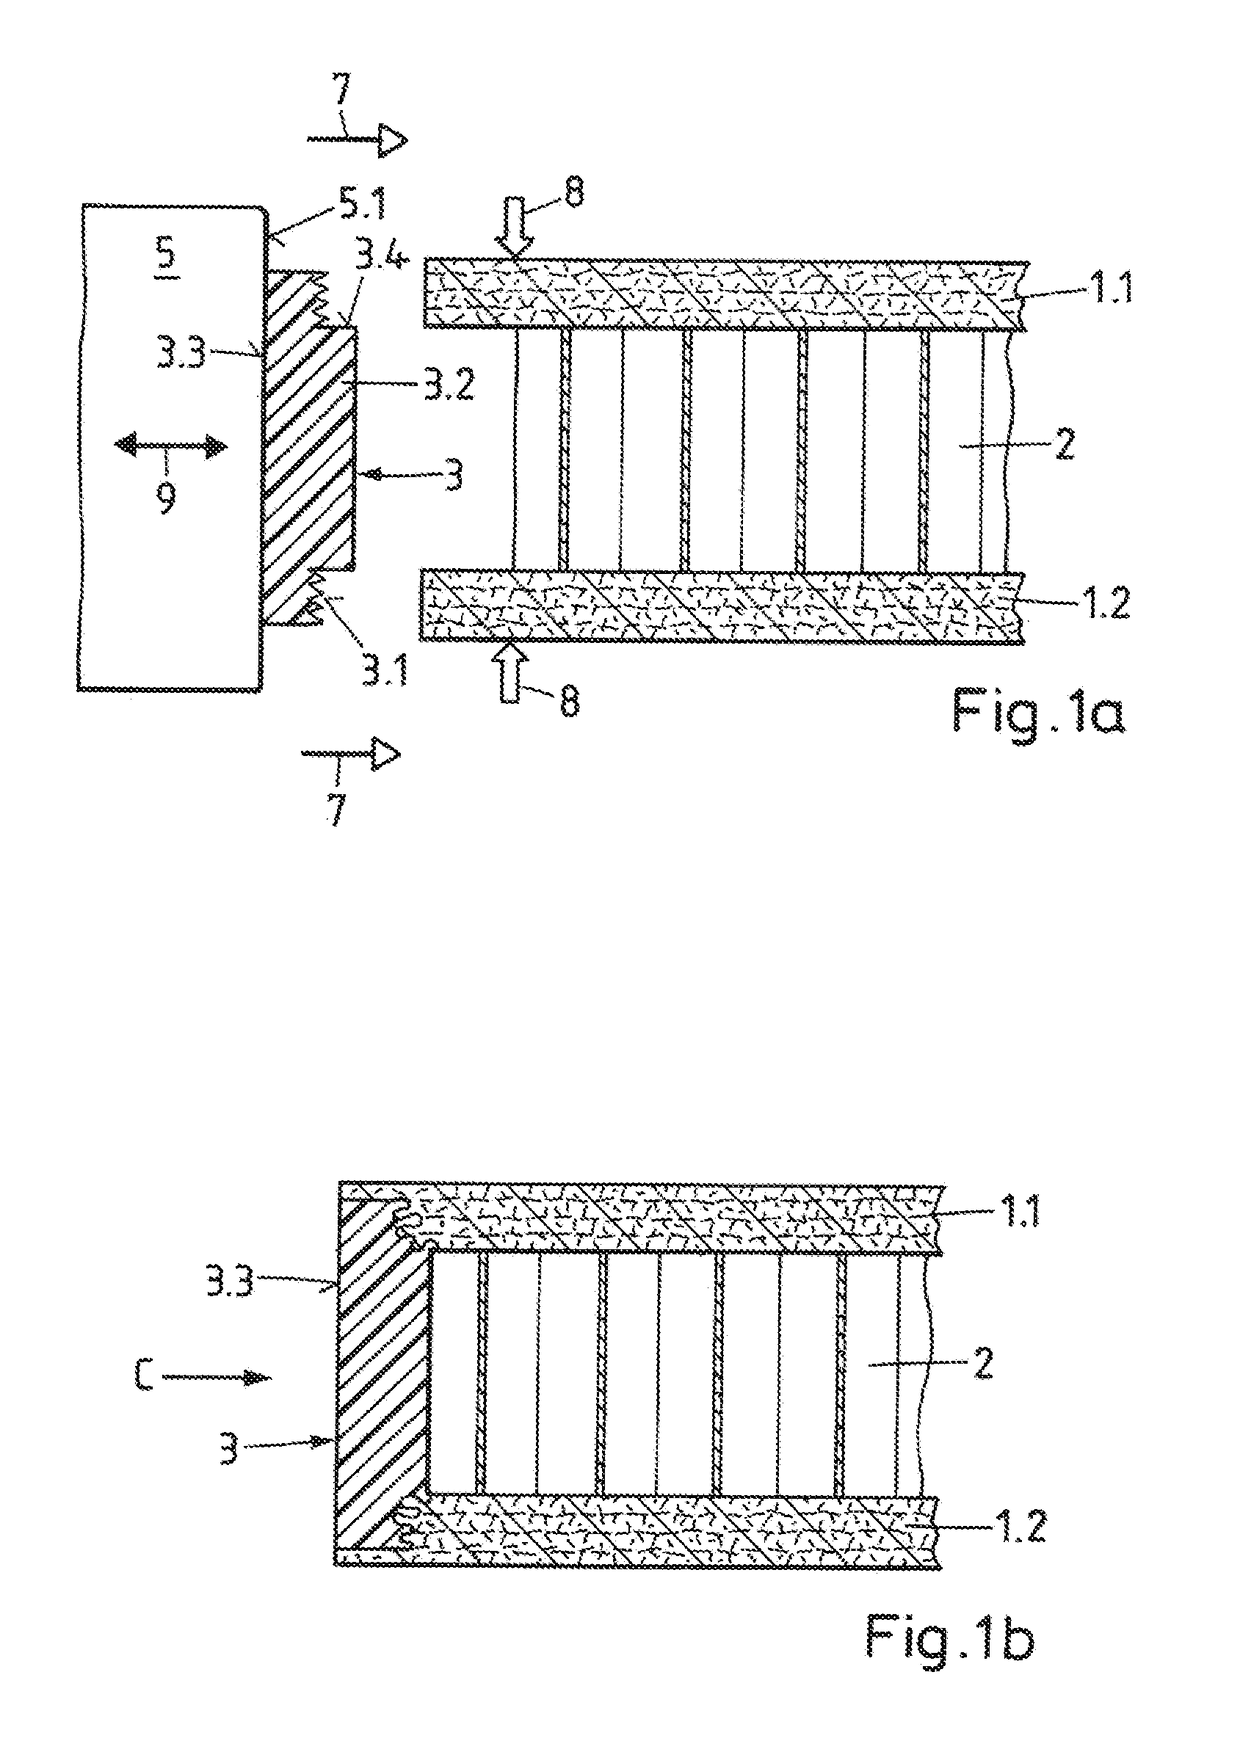 Method of fastening an edge structure to a construction element